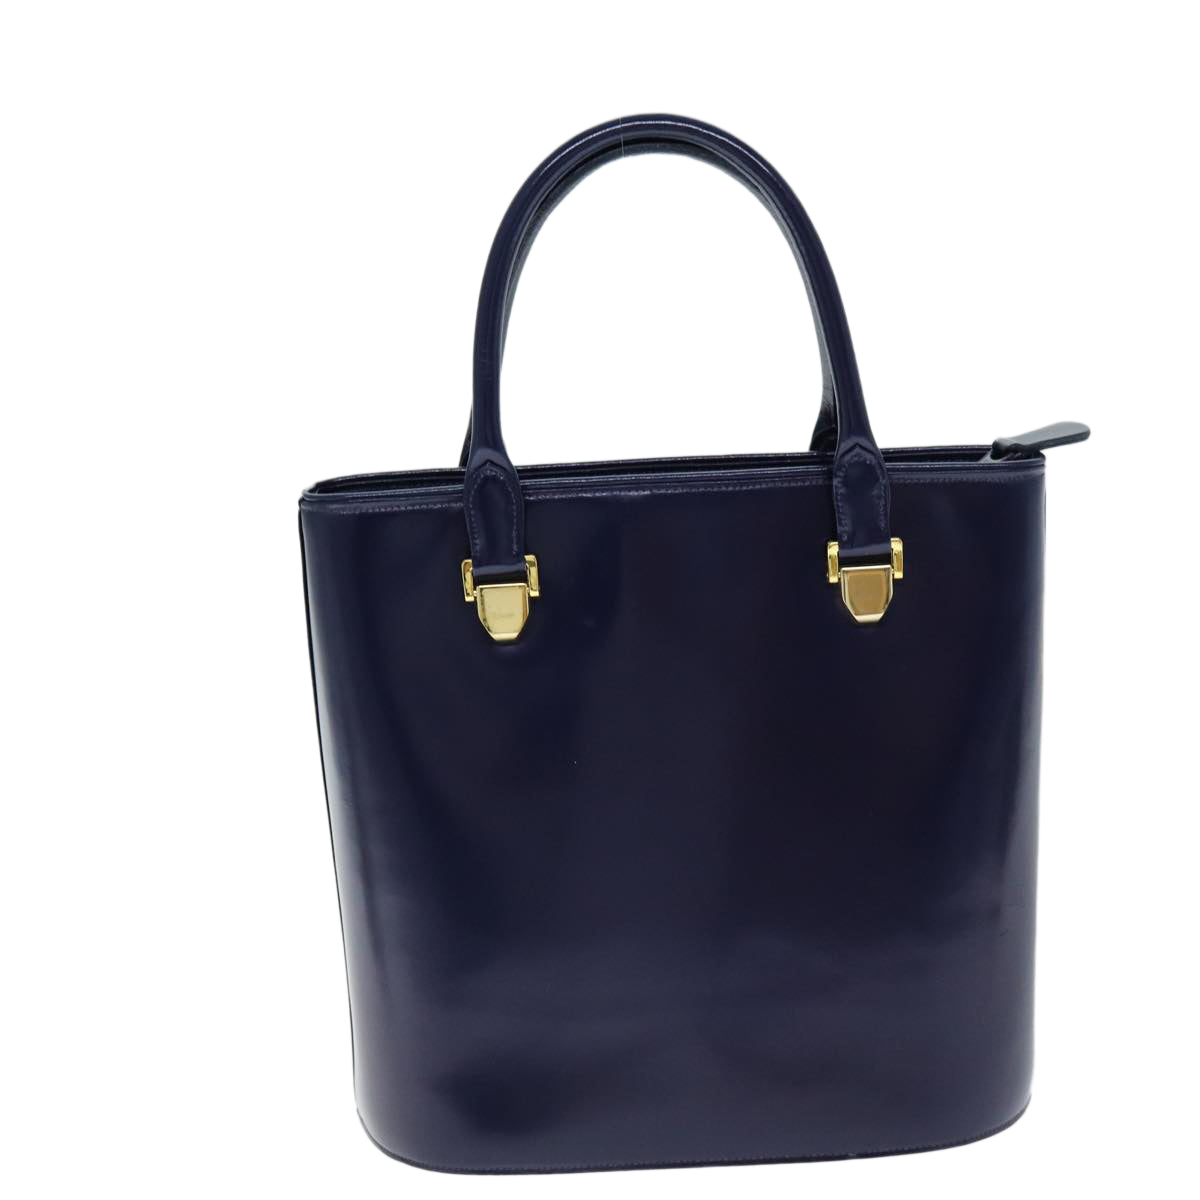 VALENTINO Hand Bag Leather Navy Auth bs14522 - 0